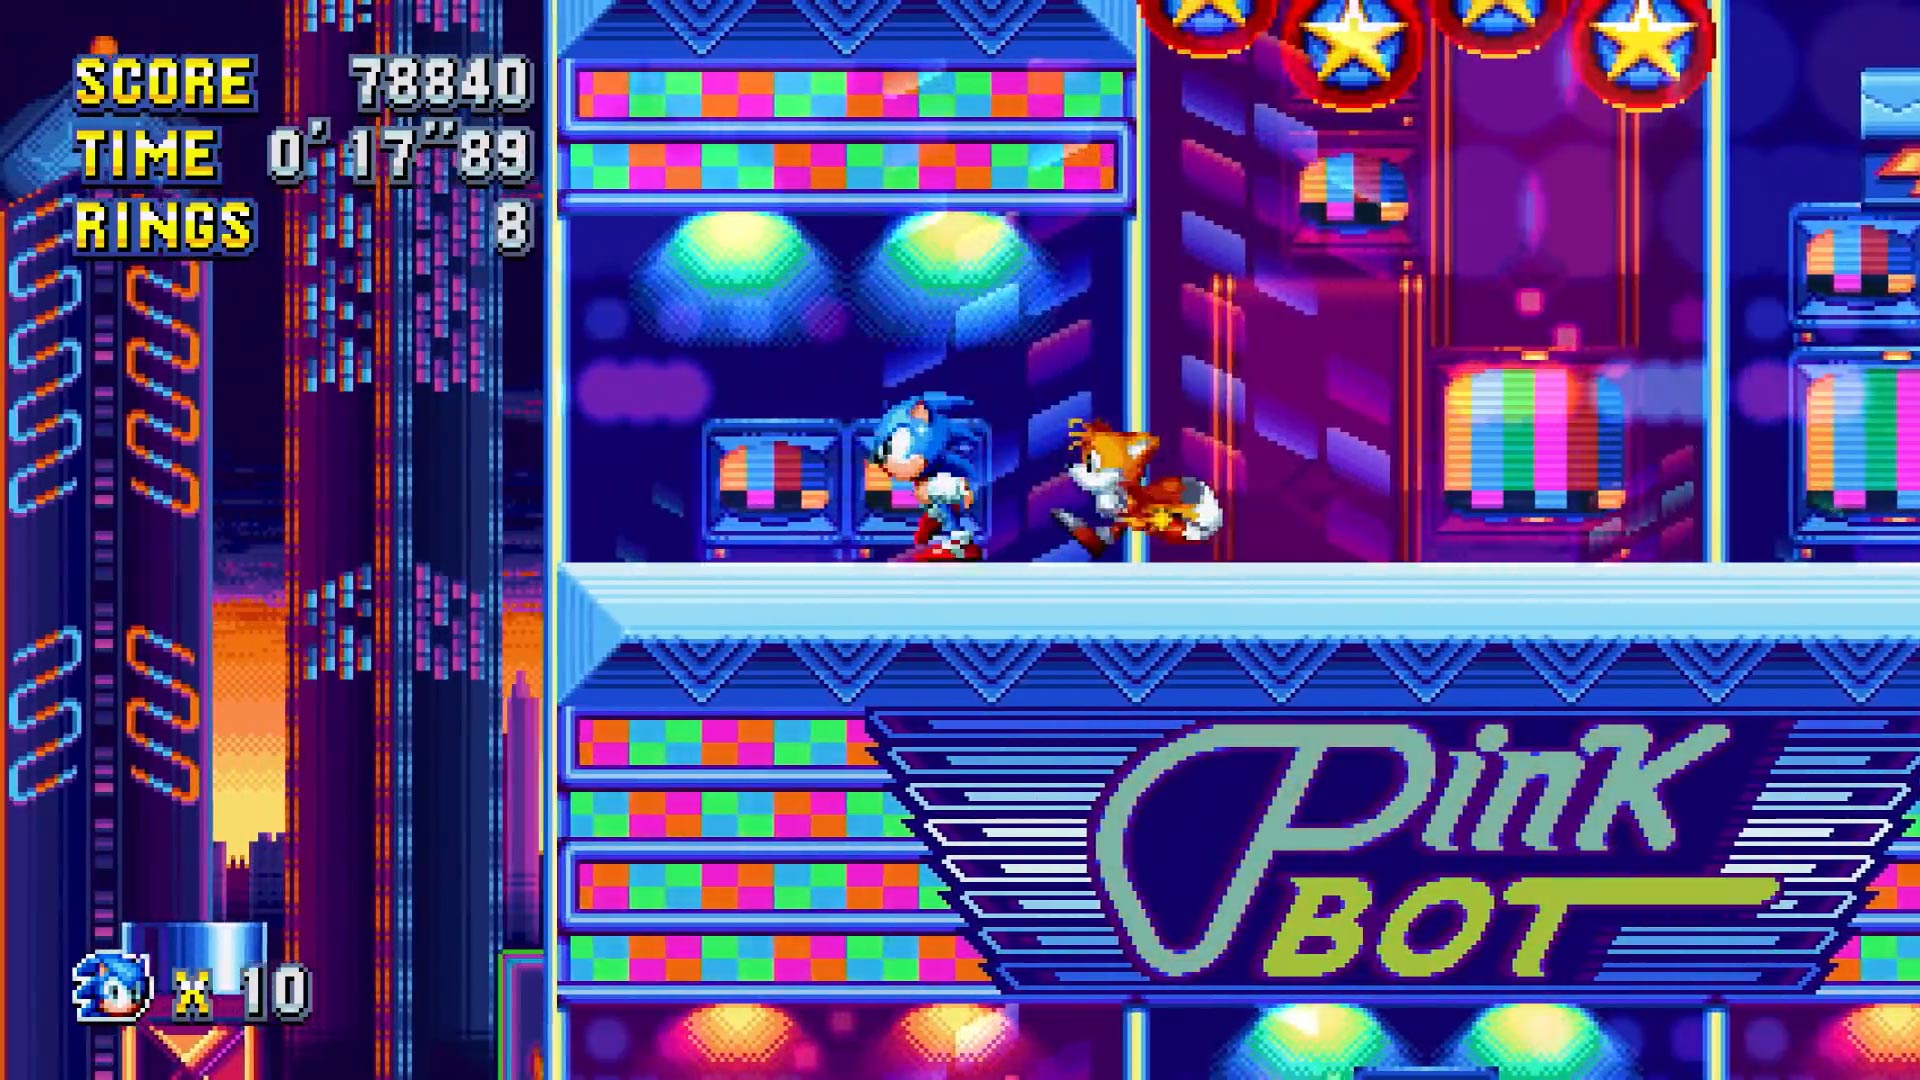 The Studiopolis weatherman miniboss is my second-favourite boss fight in all of Sonic history. (Screenshot: Sega / MobyGames)